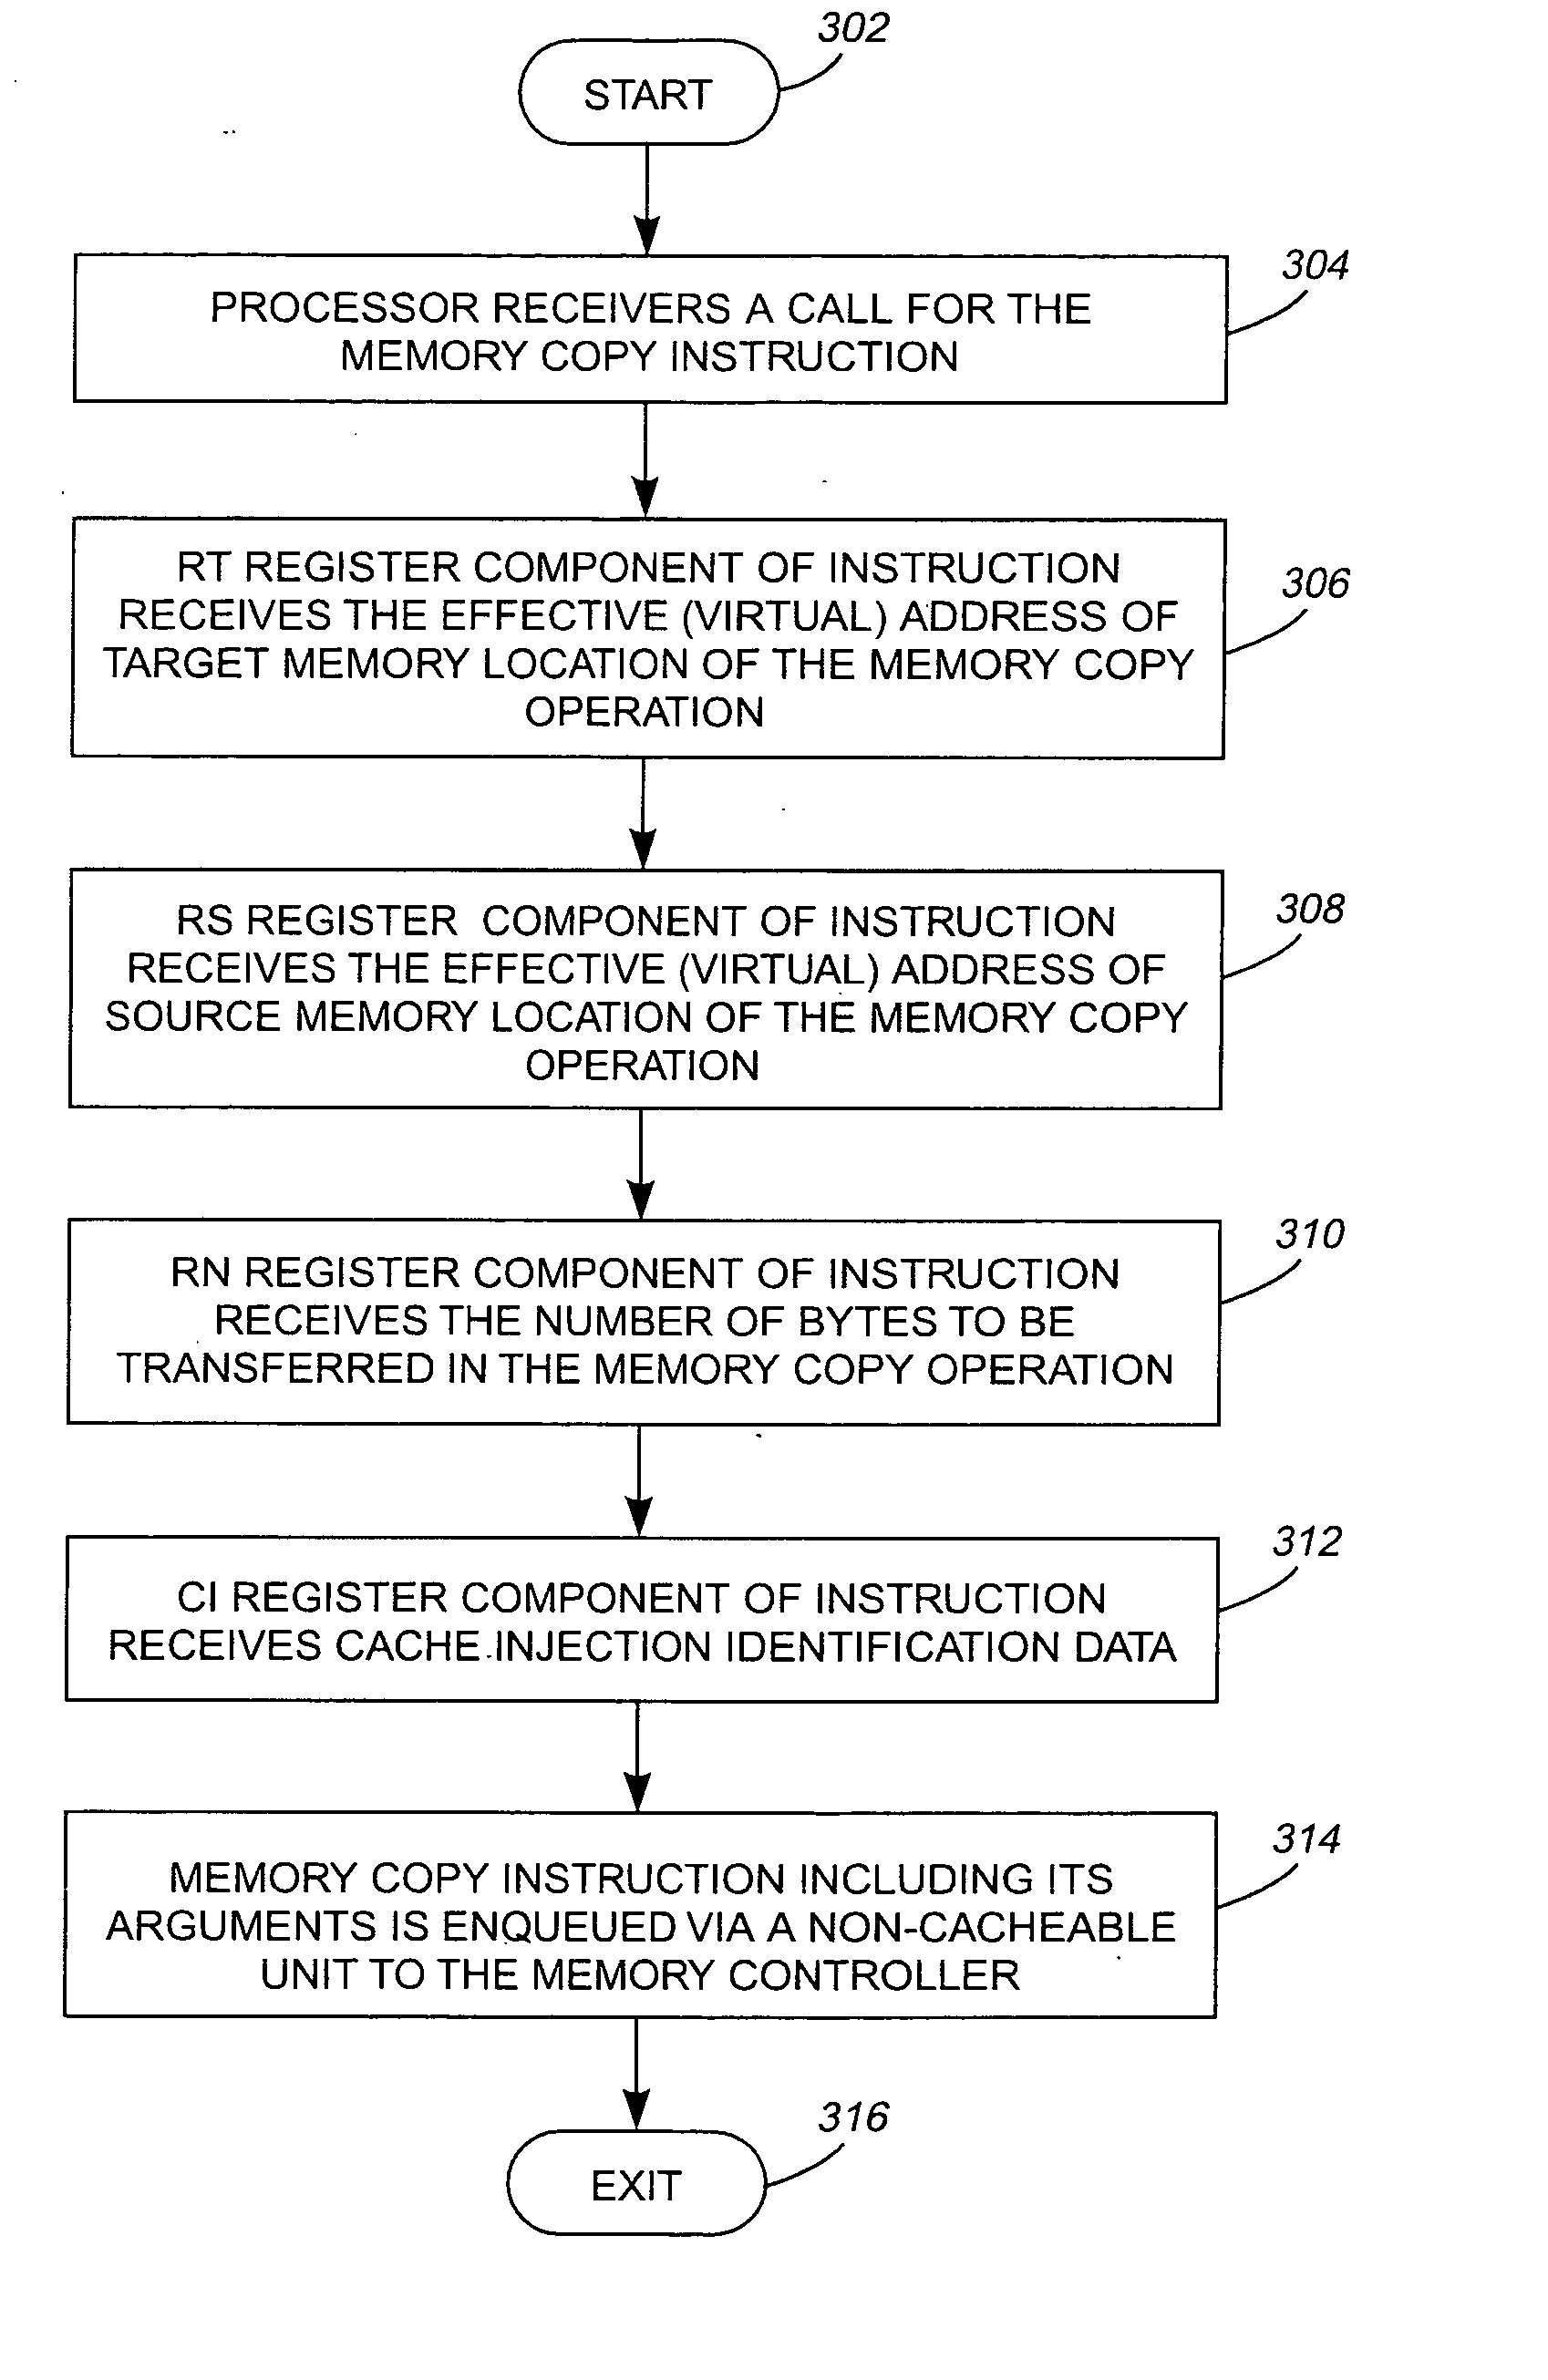 Validity of address ranges used in semi-synchronous memory copy operations